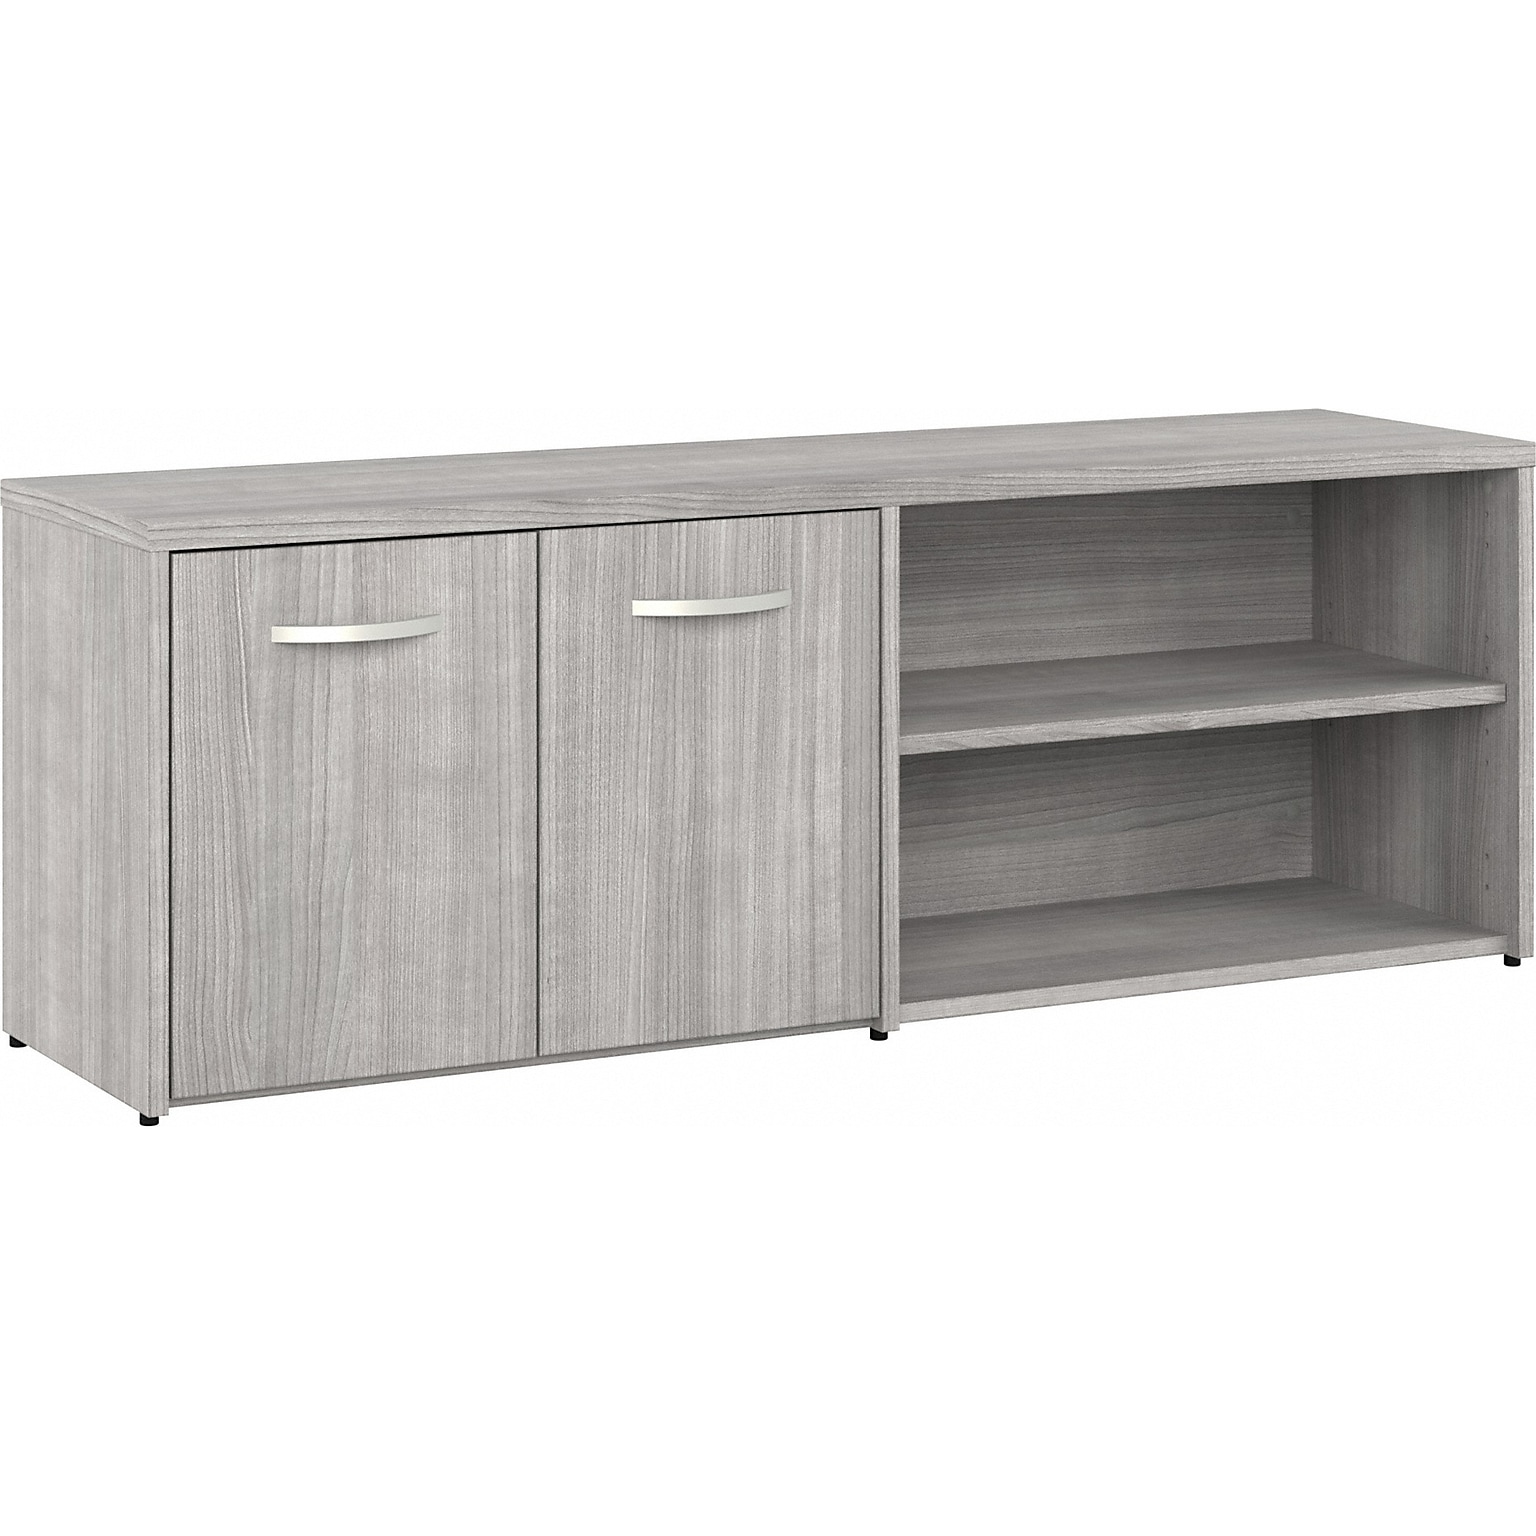 Bush Business Furniture Hybrid 21 Low Storage Cabinet with Doors and 6 Shelves, Platinum Gray (HYS160PG-Z)